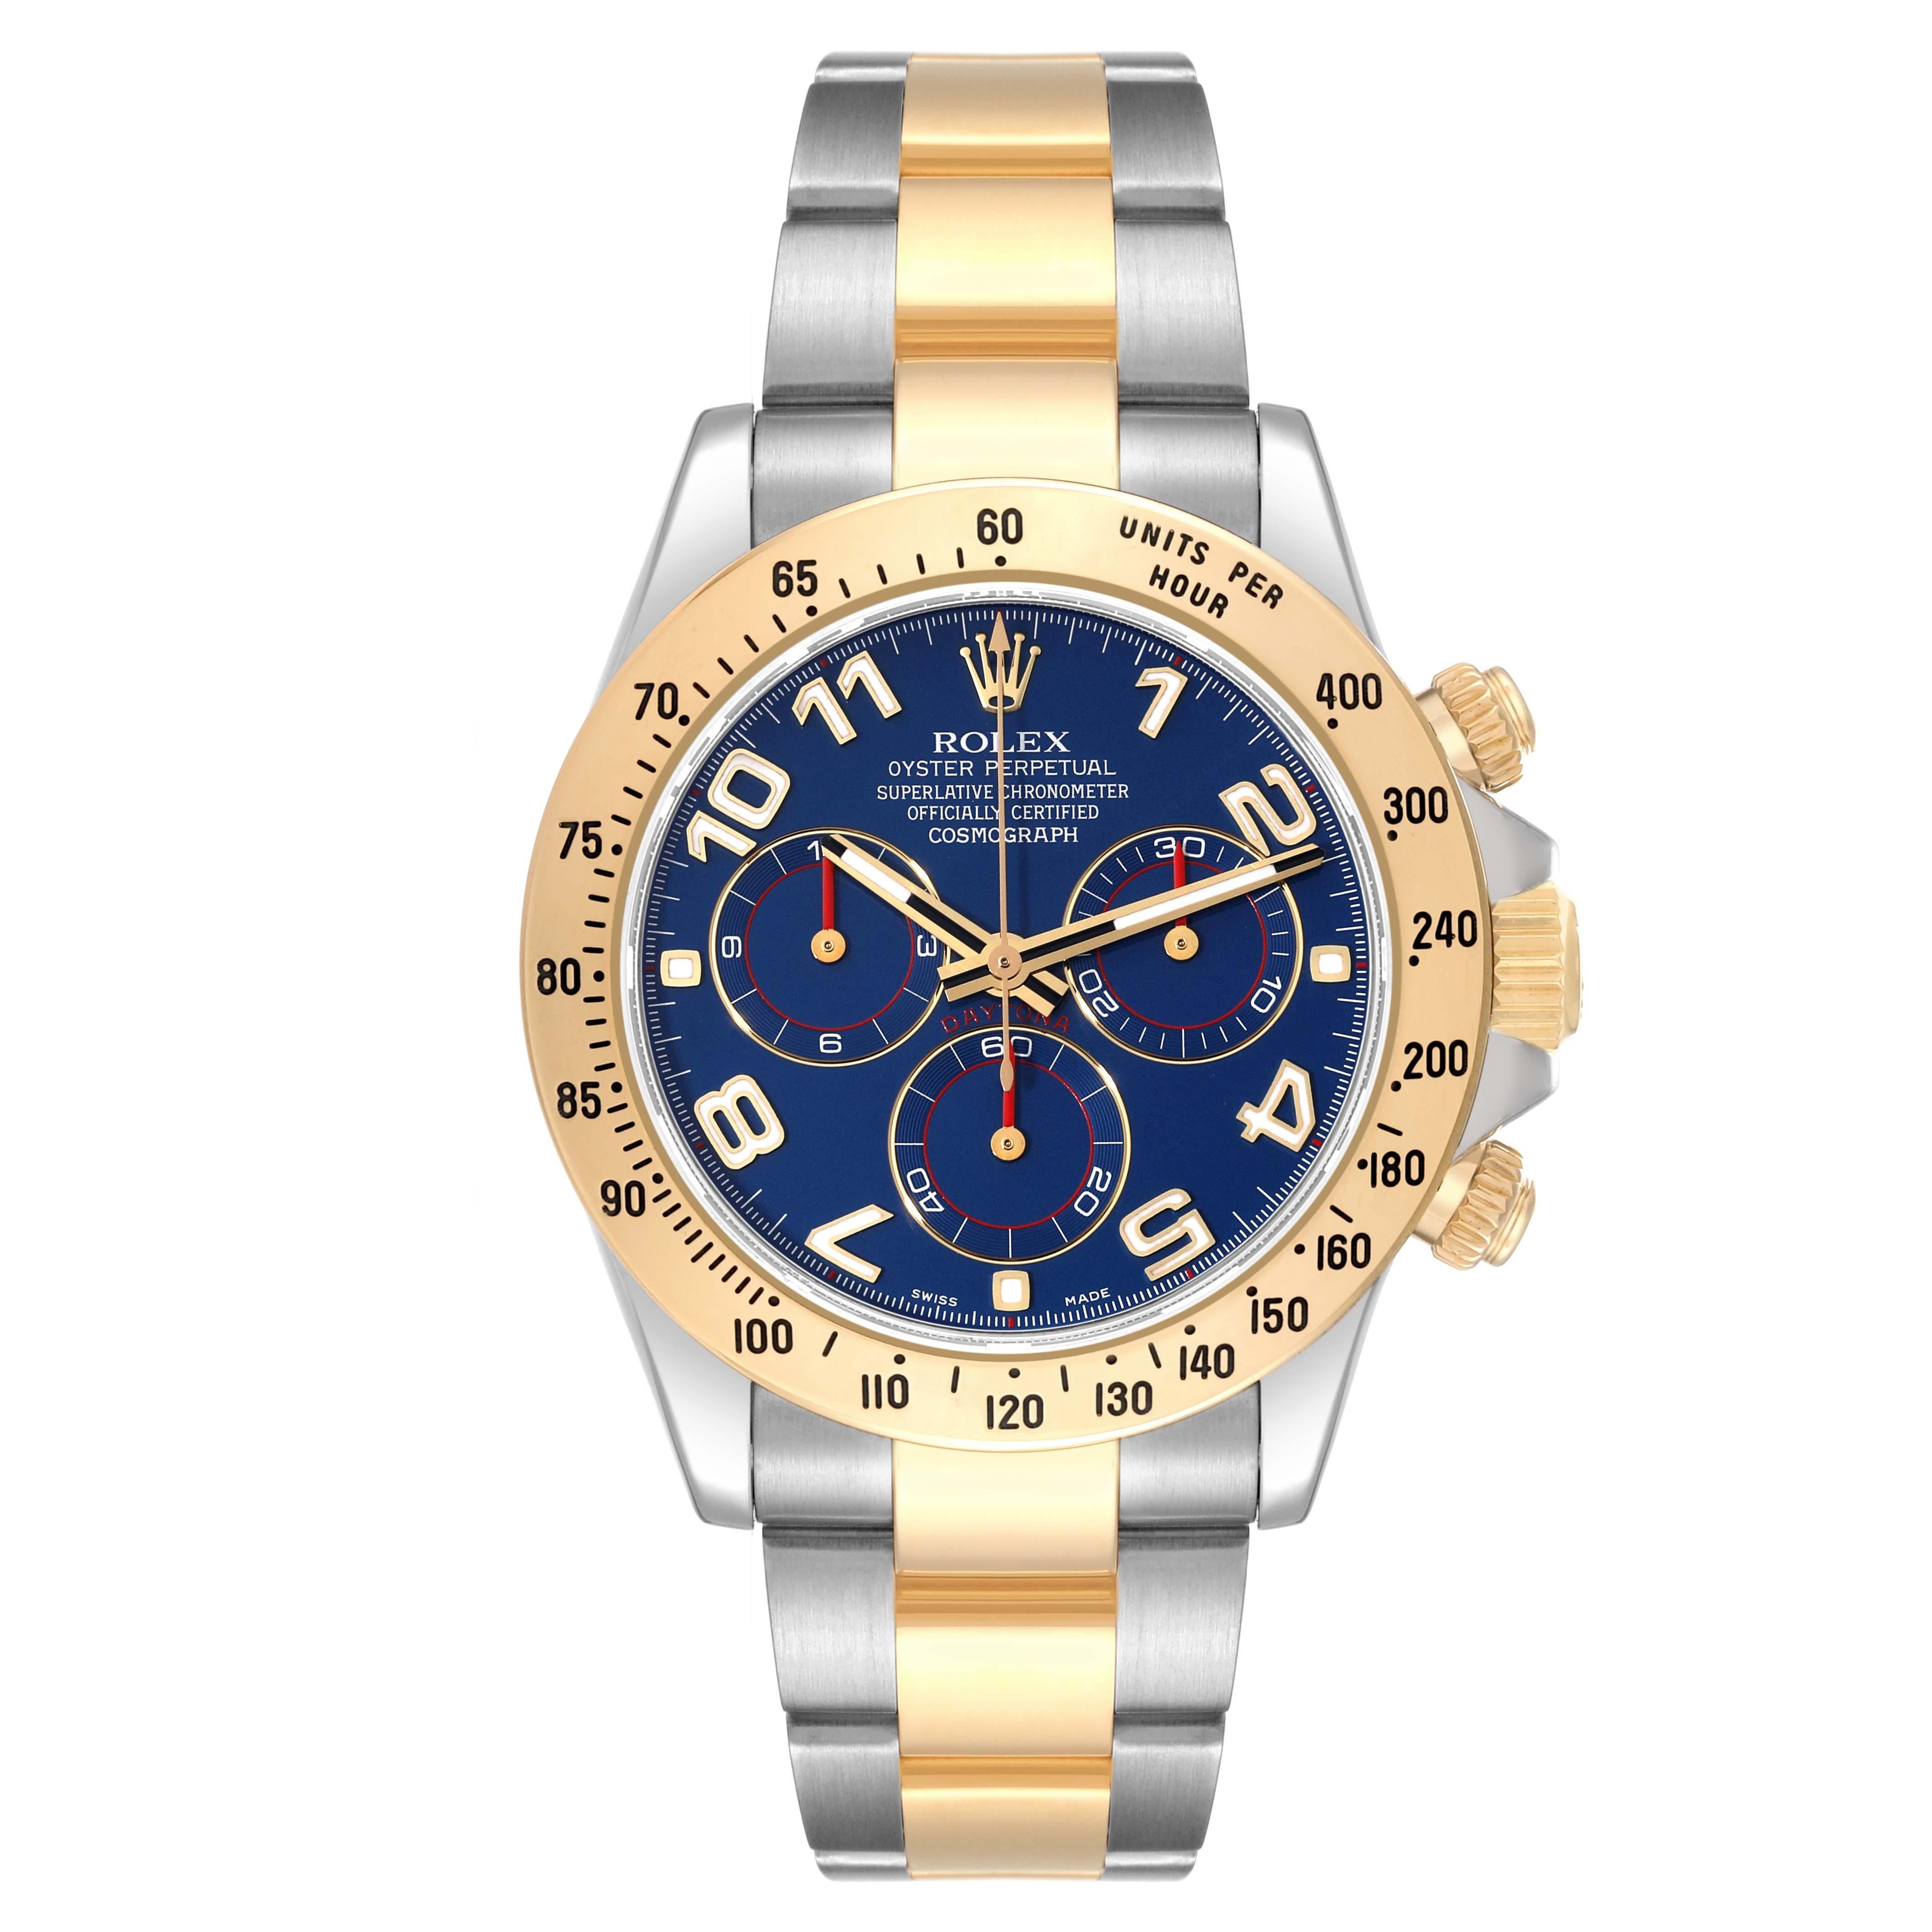 Rolex Daytona Steel Yellow Gold Blue Racing Dial Mens Watch 116523. Officially certified chronometer self-winding movement. Rhodium-plated, oeil-de-perdrix decoration, straight line lever escapement, monometallic balance adjusted to 5 positions,